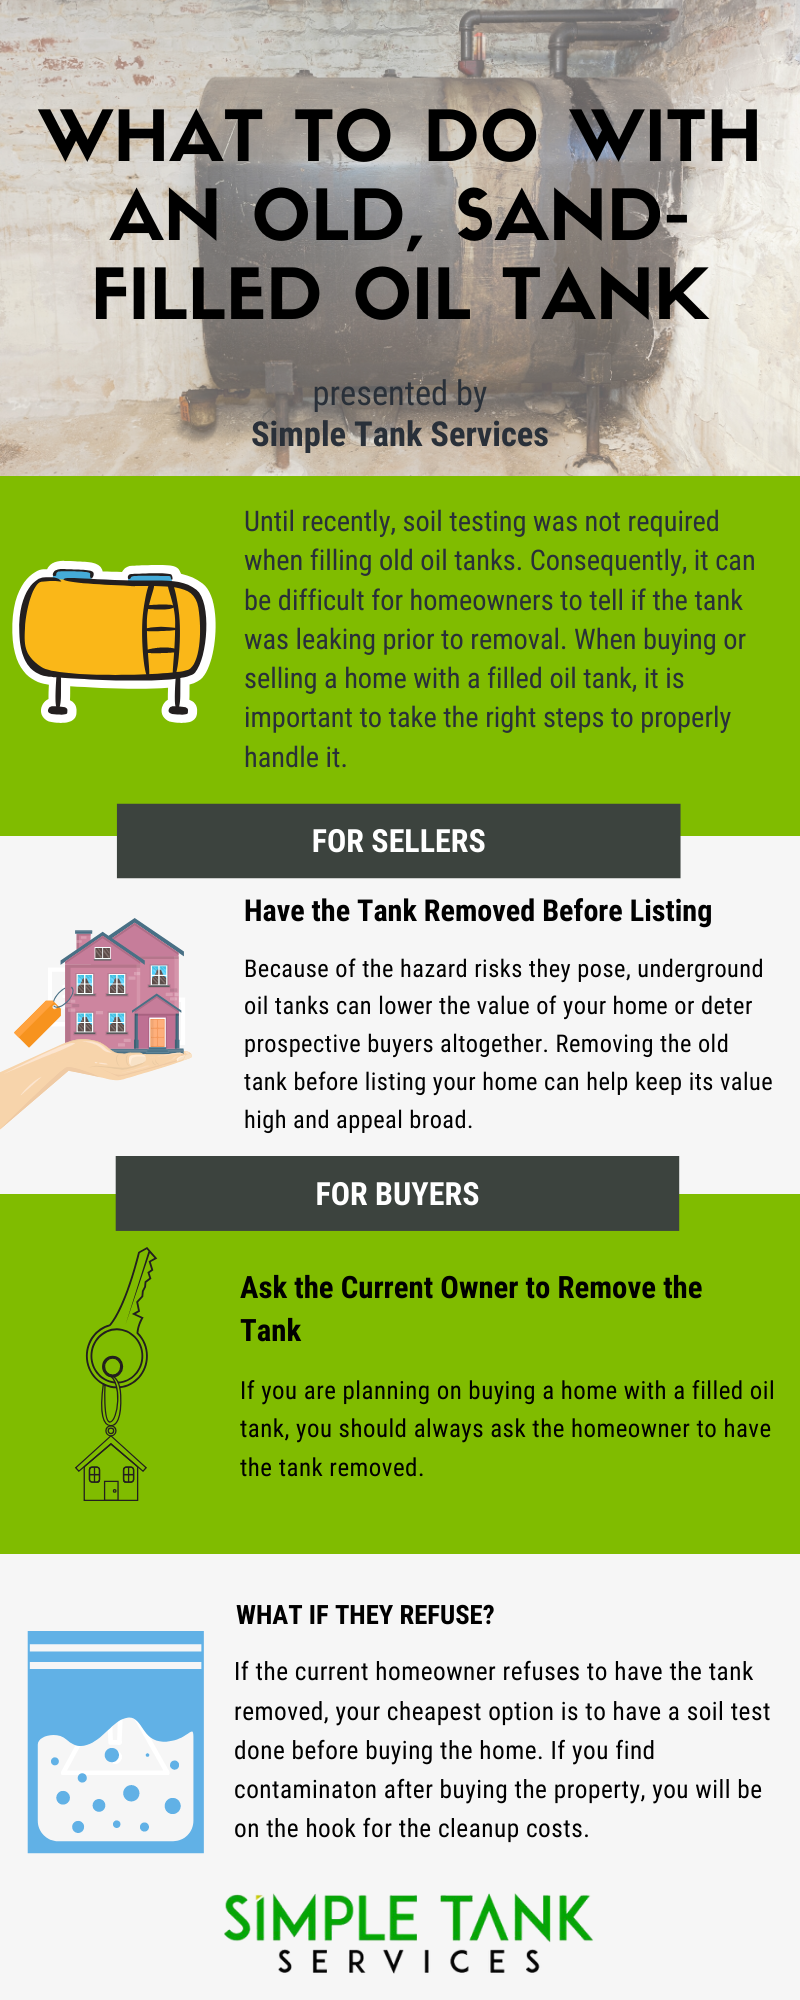 infographic depicting what to do with a residential underhround oil tank if you're a buyer or seller of the house